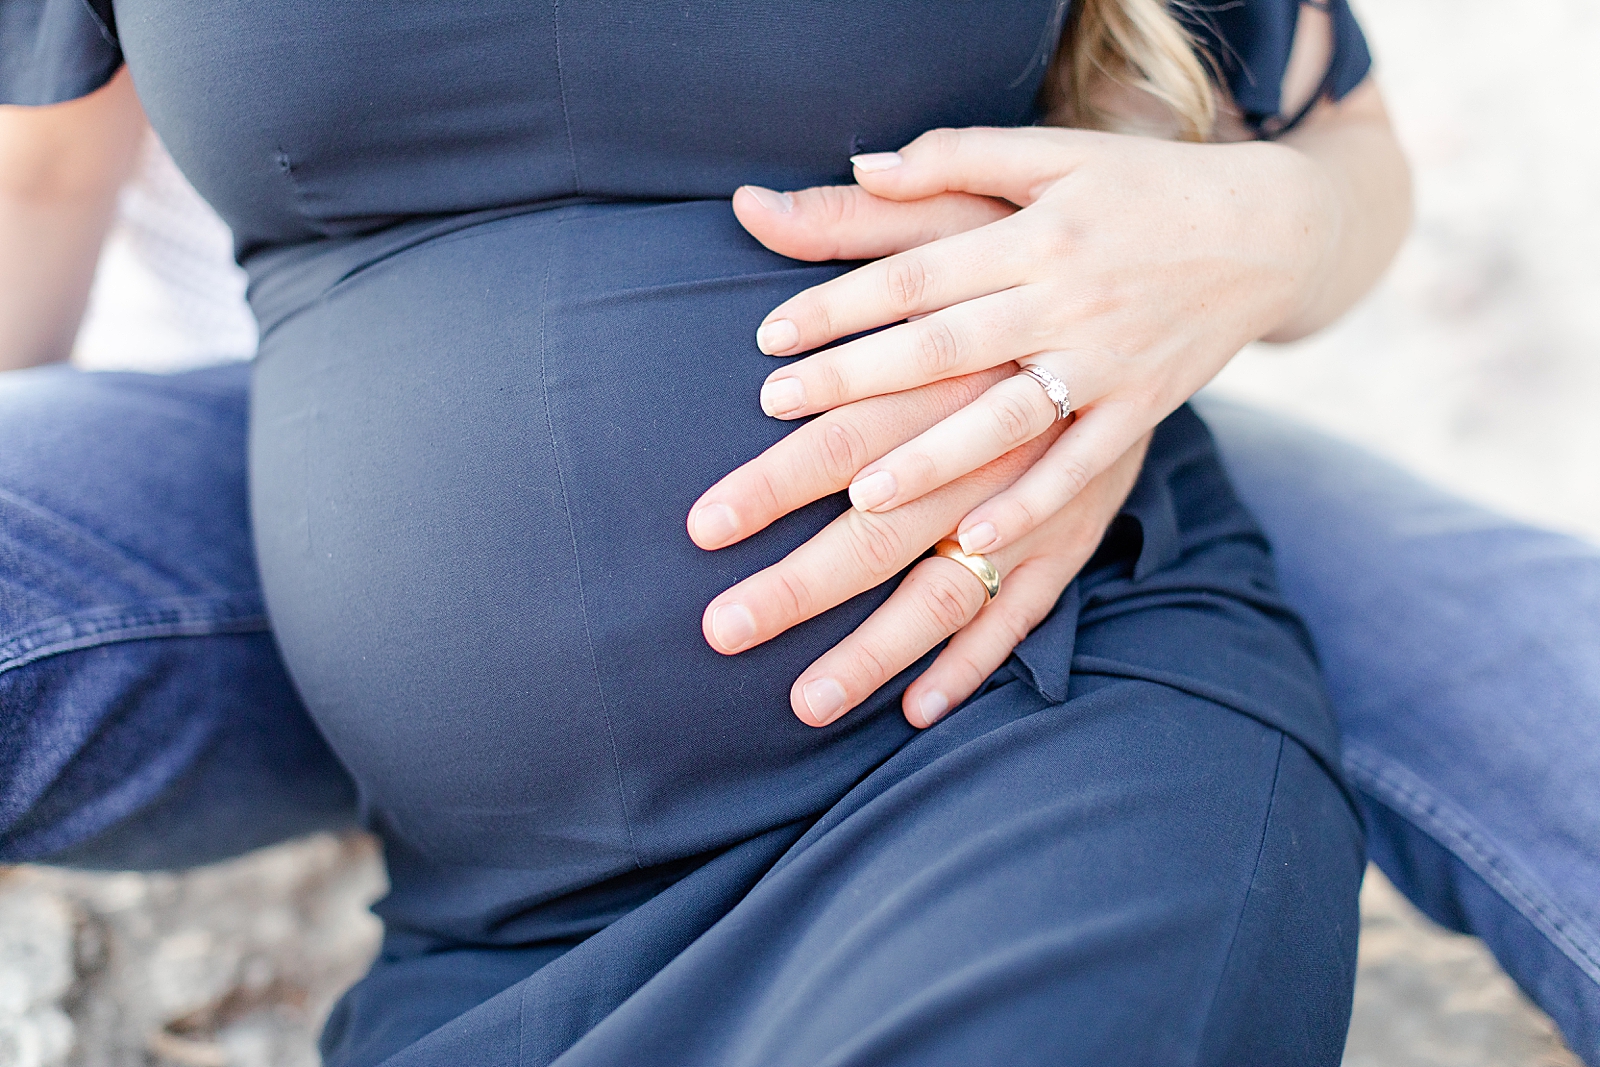 close up of husband and wife hands with wedding ring holding on to baby bump wearing navy blue dress